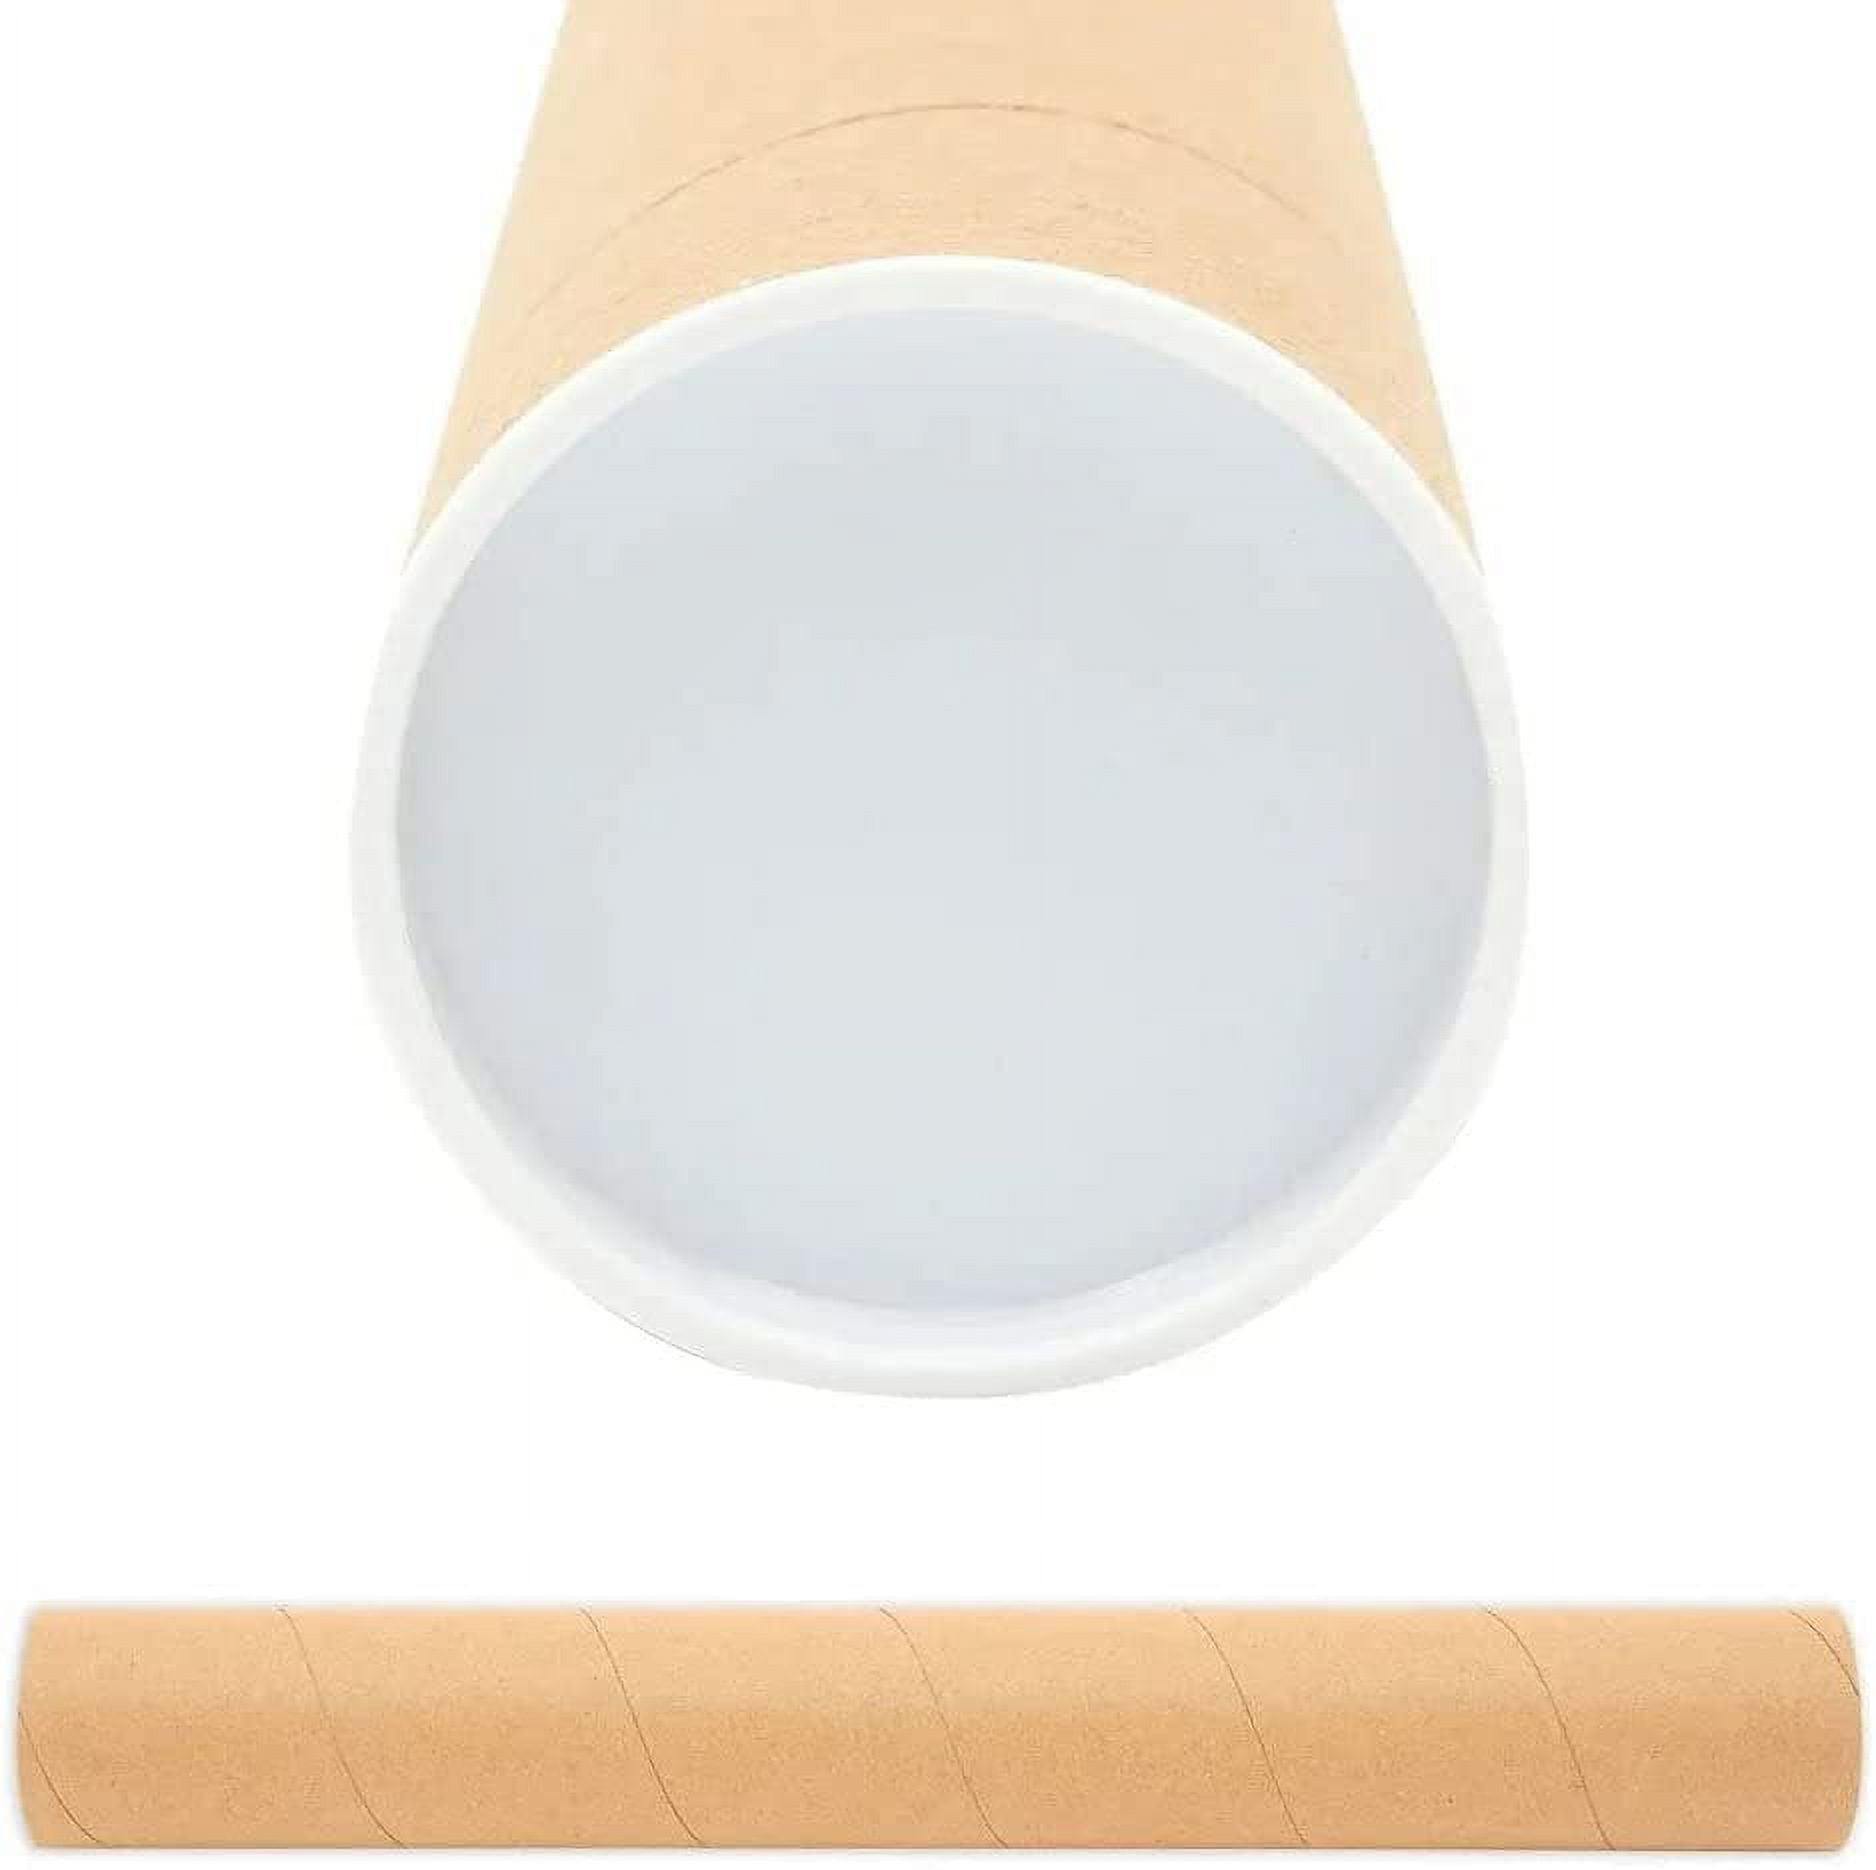 12PCS Mailing Tubes 2X12 Inch Cardboard Mailers Tube With Caps For  Packaging Posters For Mailing